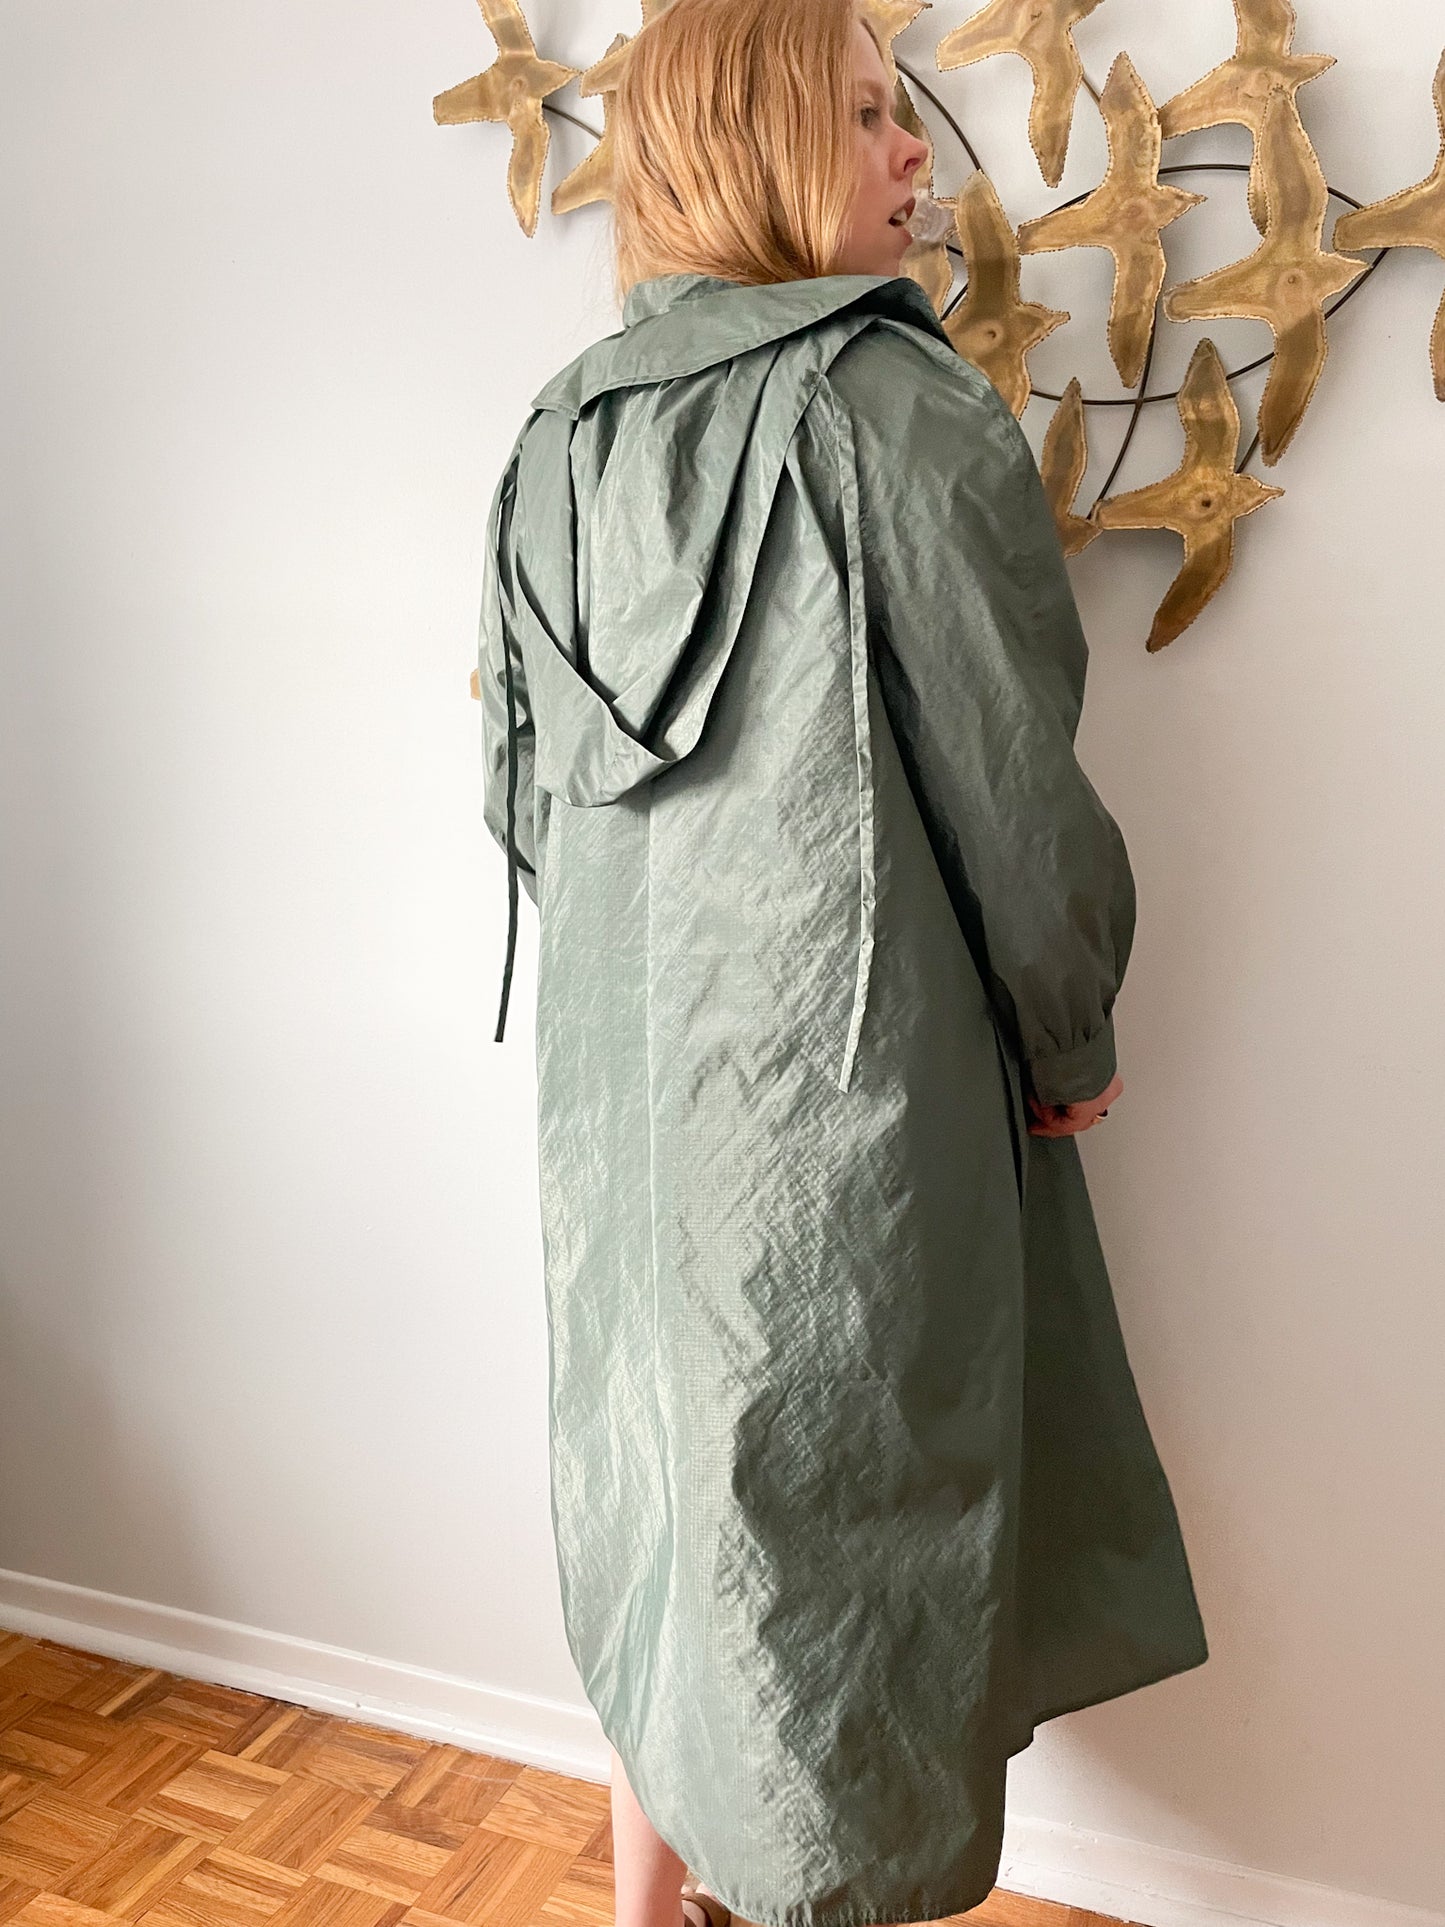 Vintage Hooded Green Buttoned Long Water Repellent Rain Jacket - 4XL